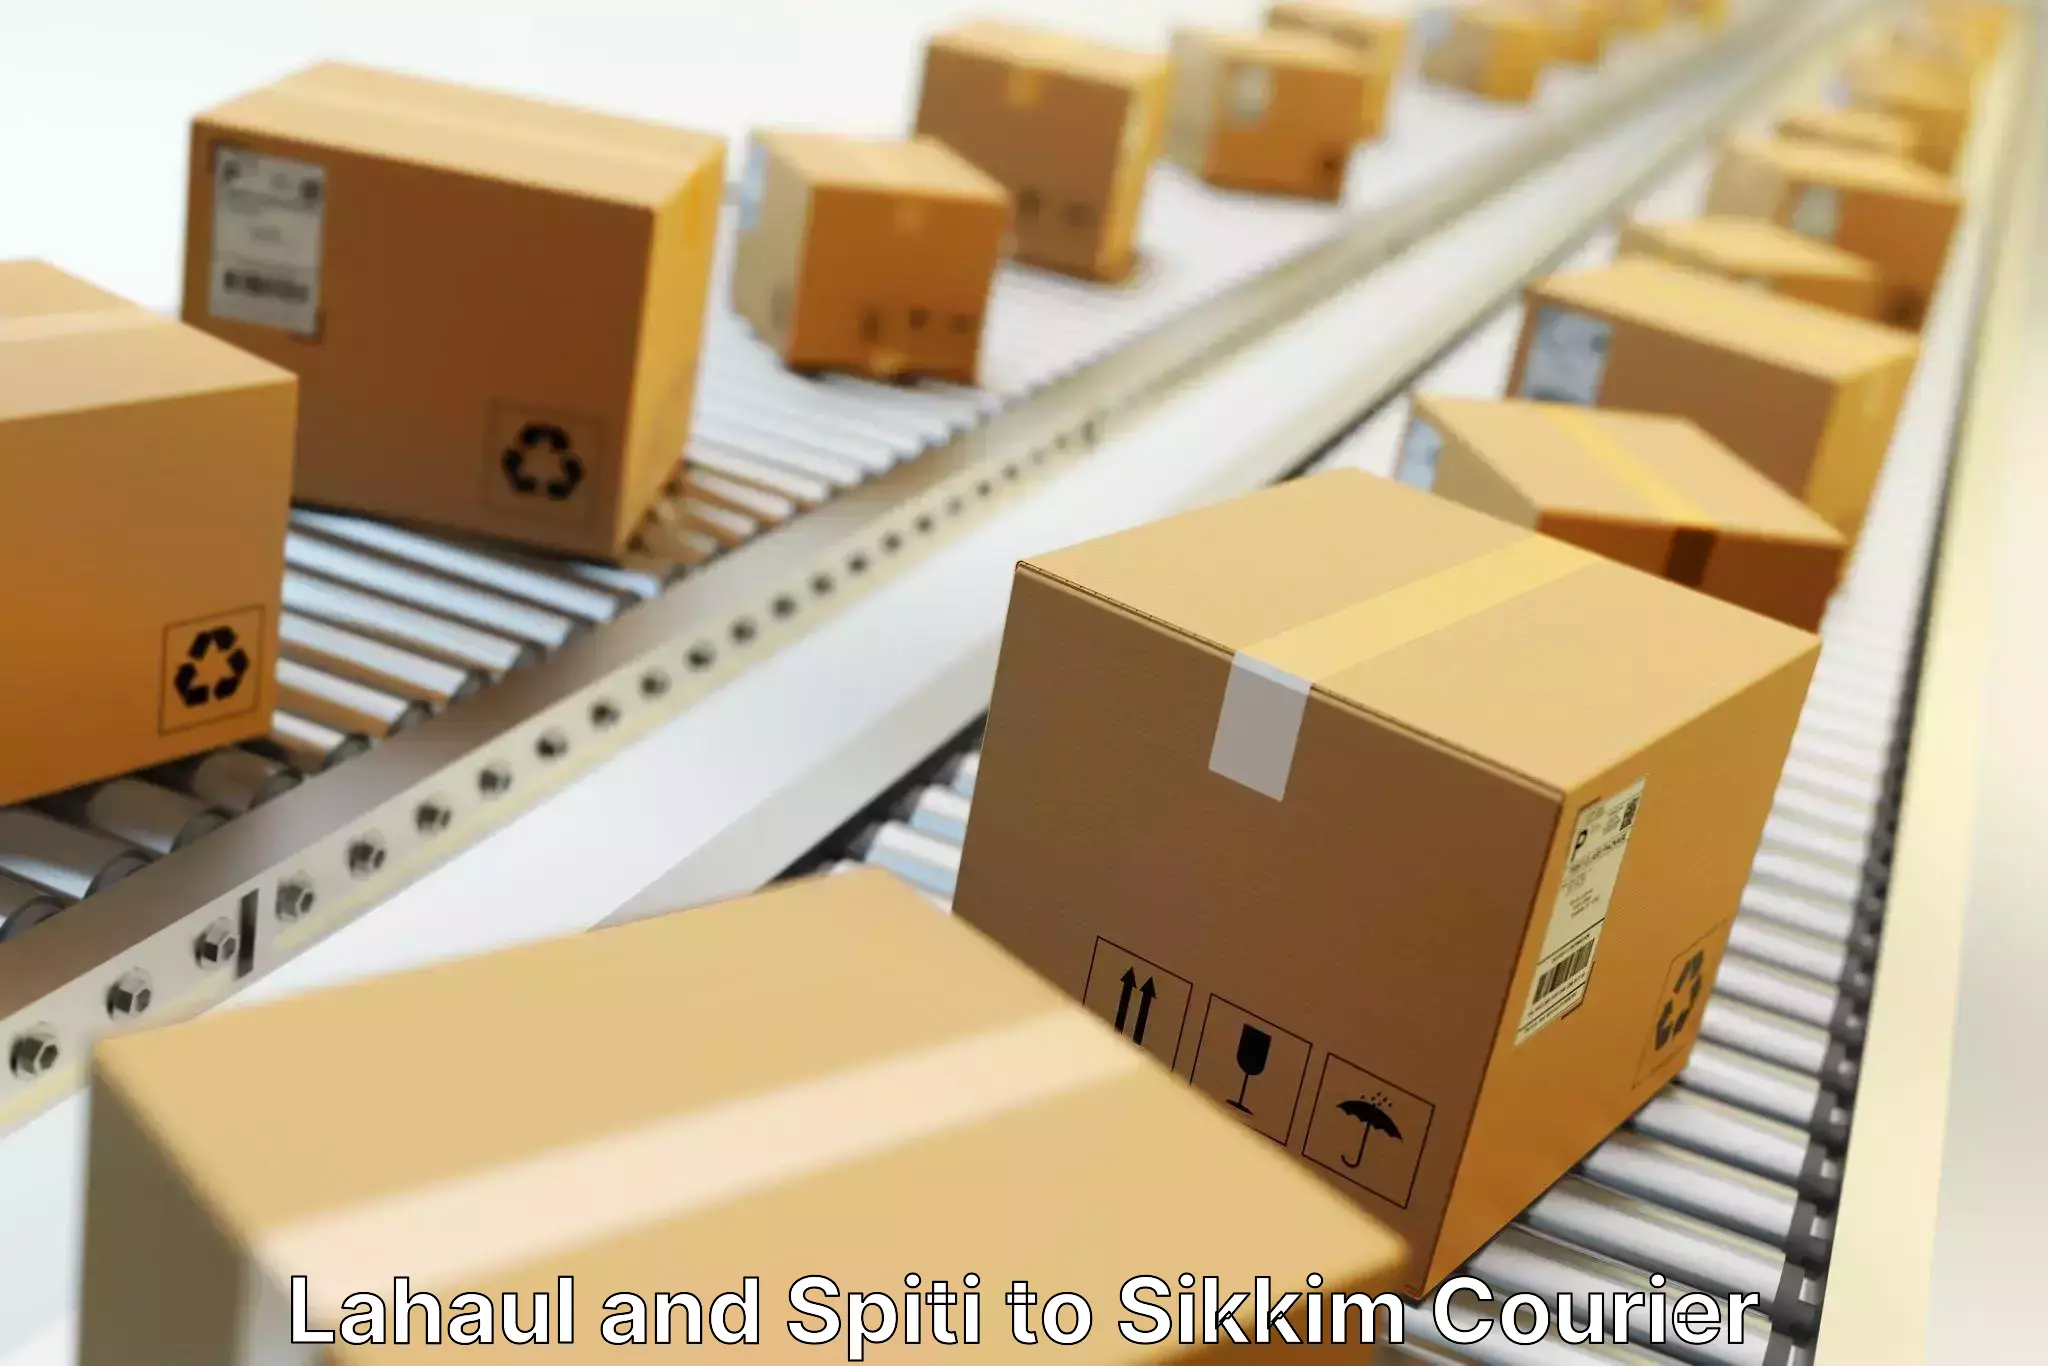 Lightweight parcel options Lahaul and Spiti to East Sikkim